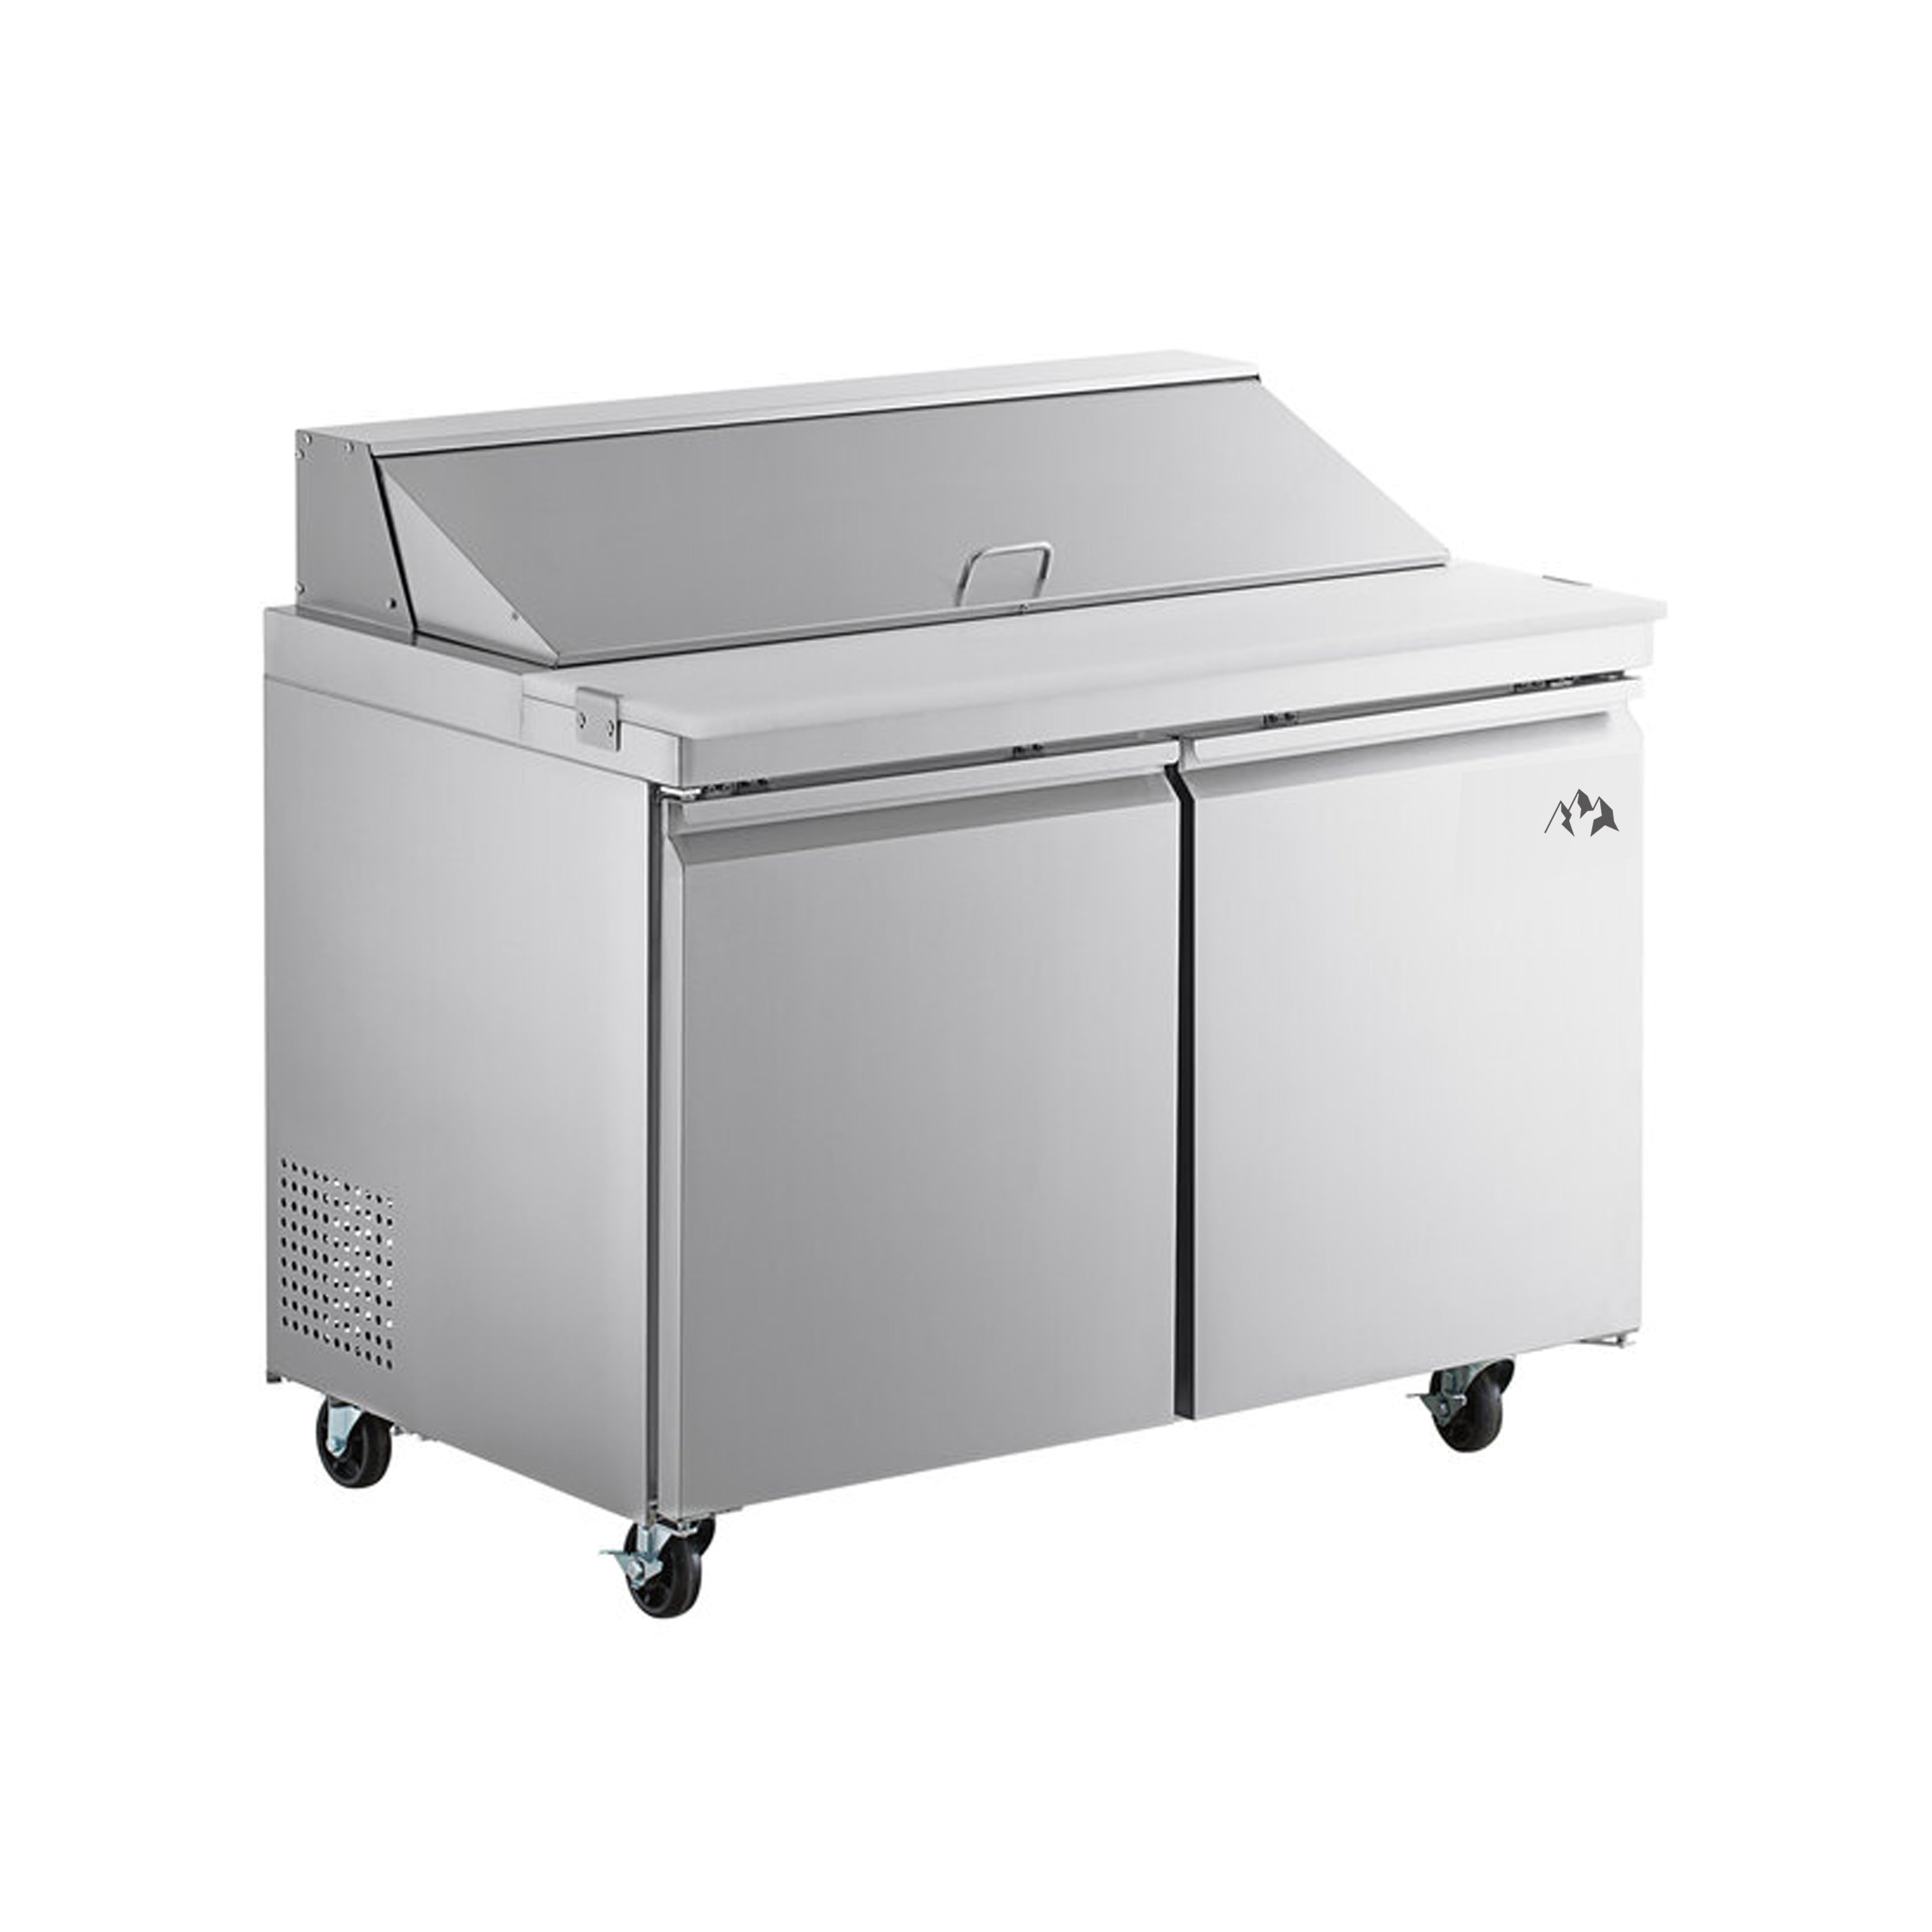 Chef AAA - SS-PT-46-HC, Commercial 46" Sandwich Prep Table Refrigerator 12 Pans 2 Door Stainless Steel 9.5 cu.ft.